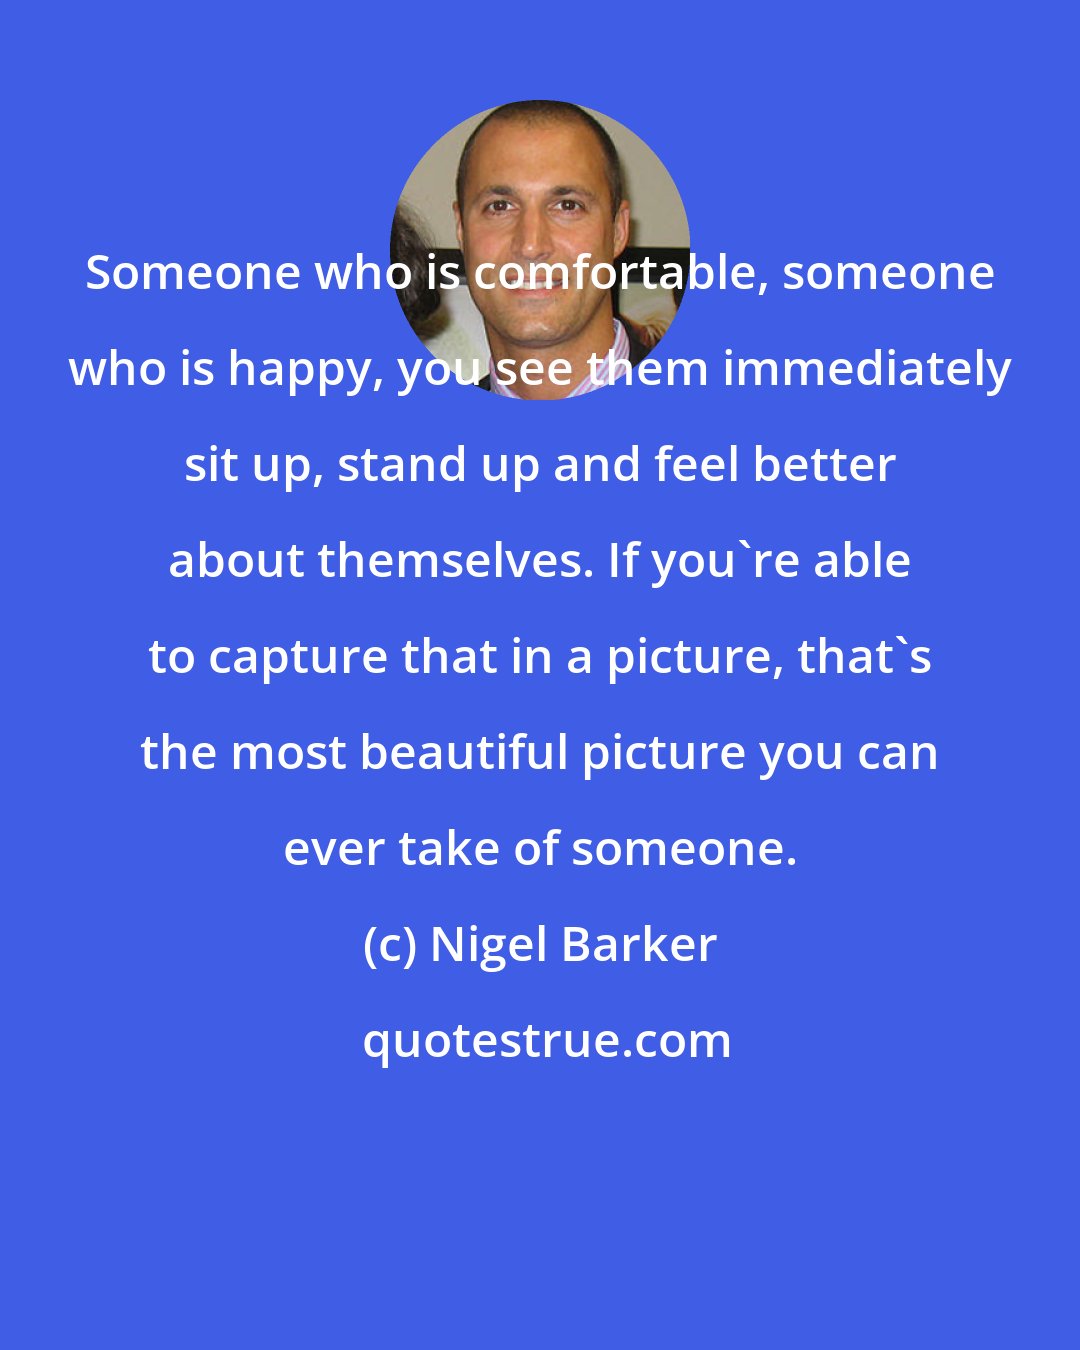 Nigel Barker: Someone who is comfortable, someone who is happy, you see them immediately sit up, stand up and feel better about themselves. If you're able to capture that in a picture, that's the most beautiful picture you can ever take of someone.